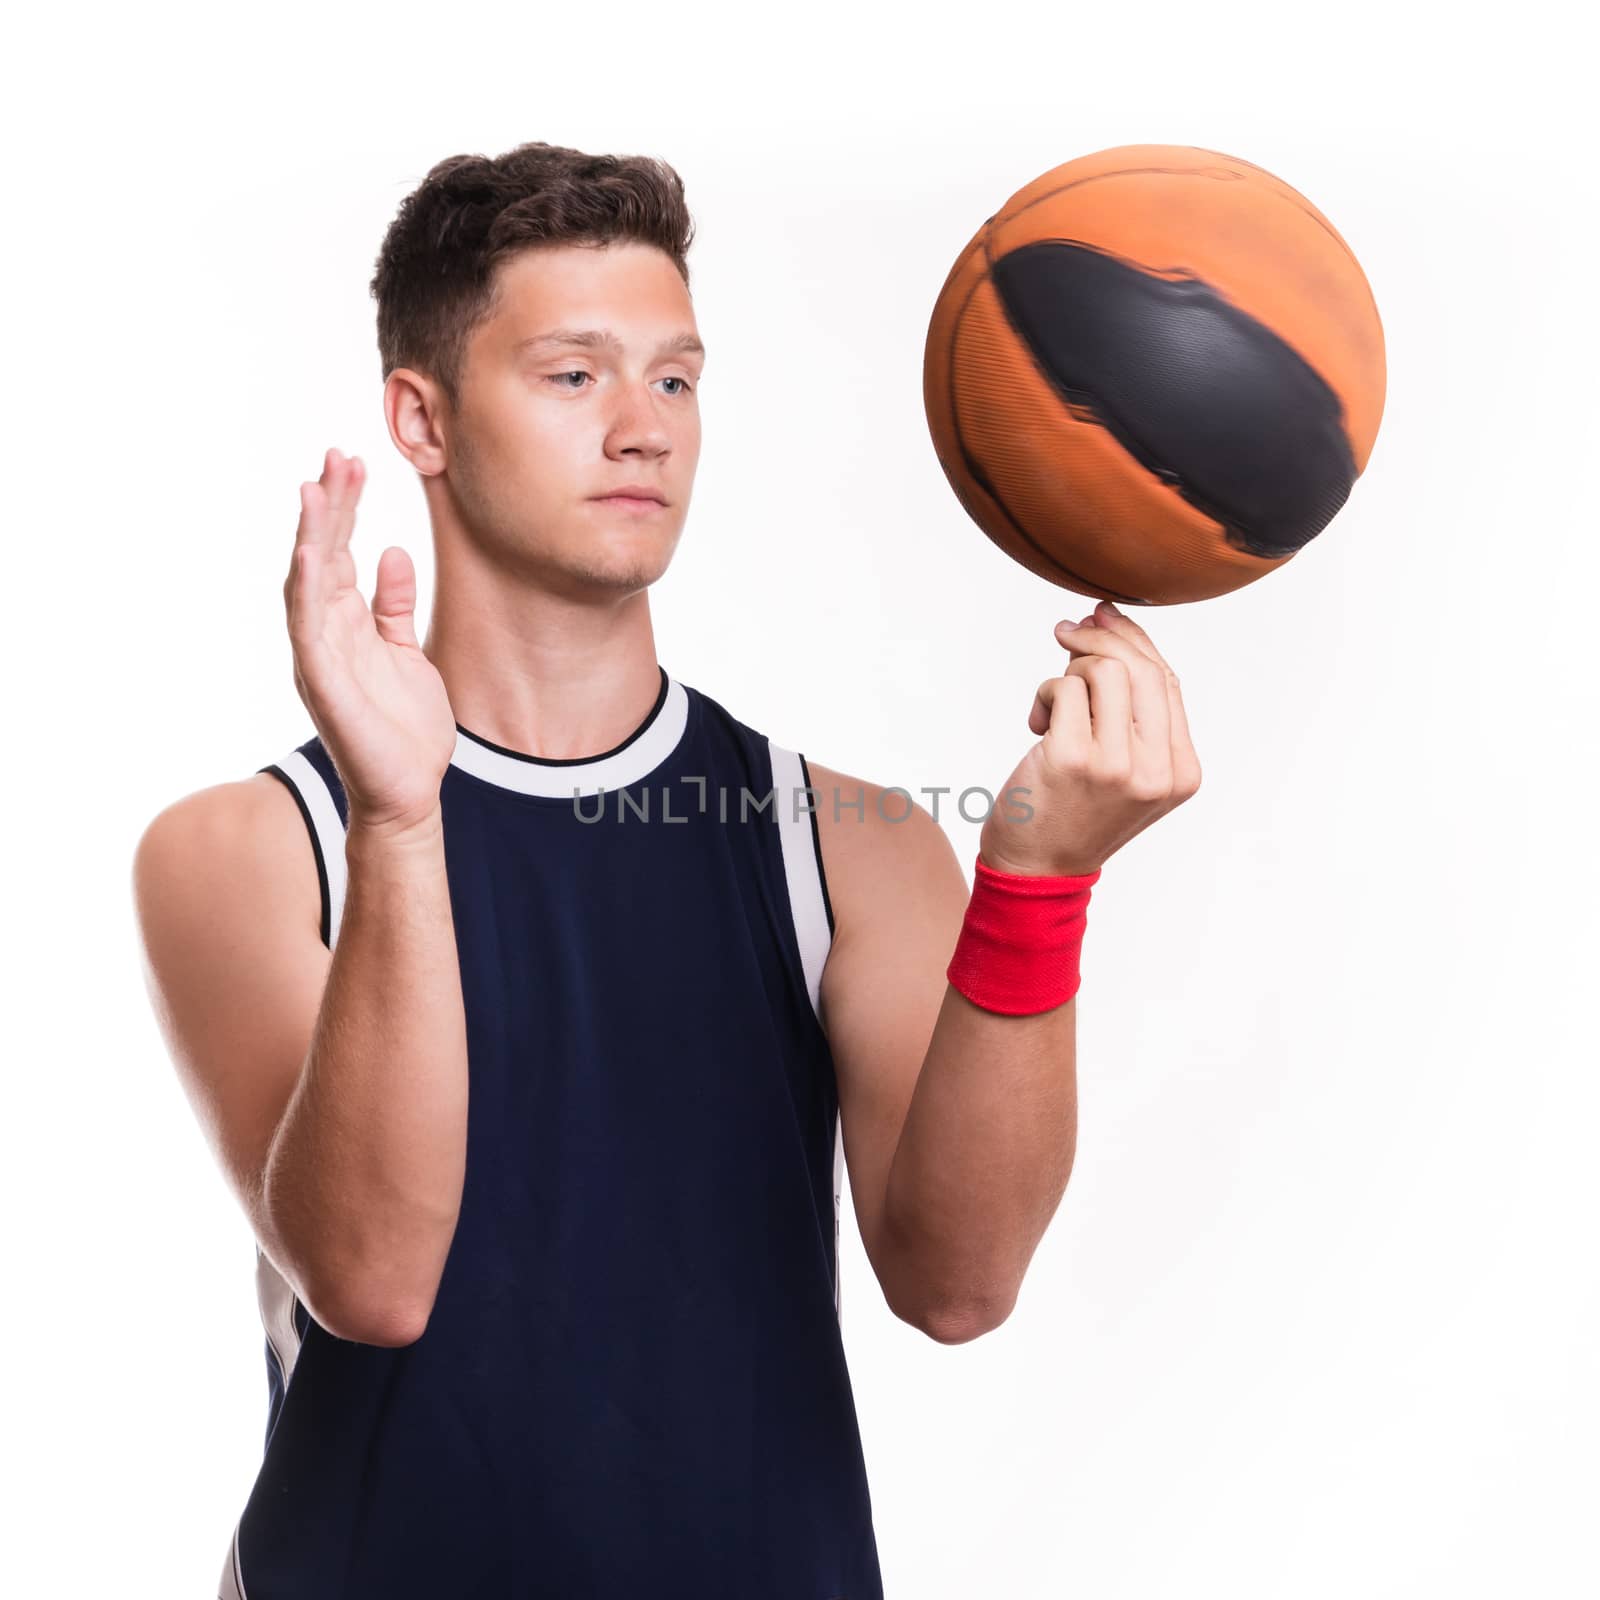 Basketball player spins the ball on his finger by MichalLudwiczak